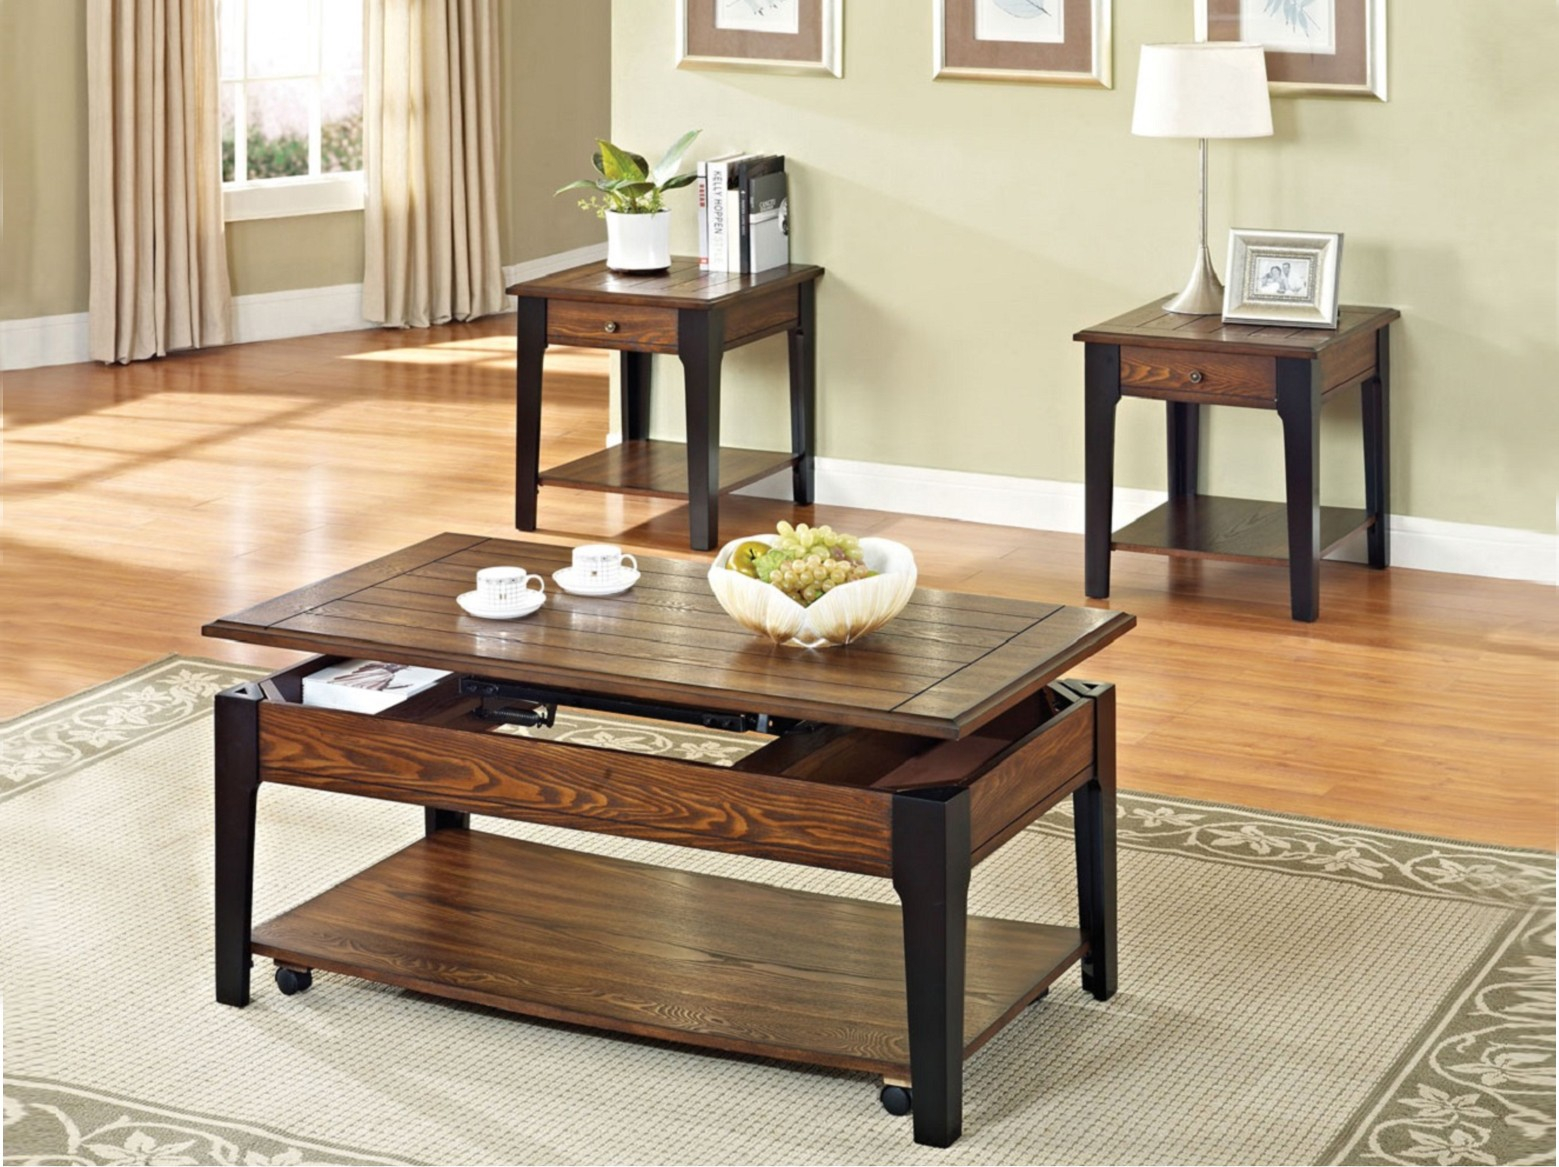 If 2059 3pc Coffee Table Set In Solid Wood With Black Legs Get with measurements 1559 X 1167